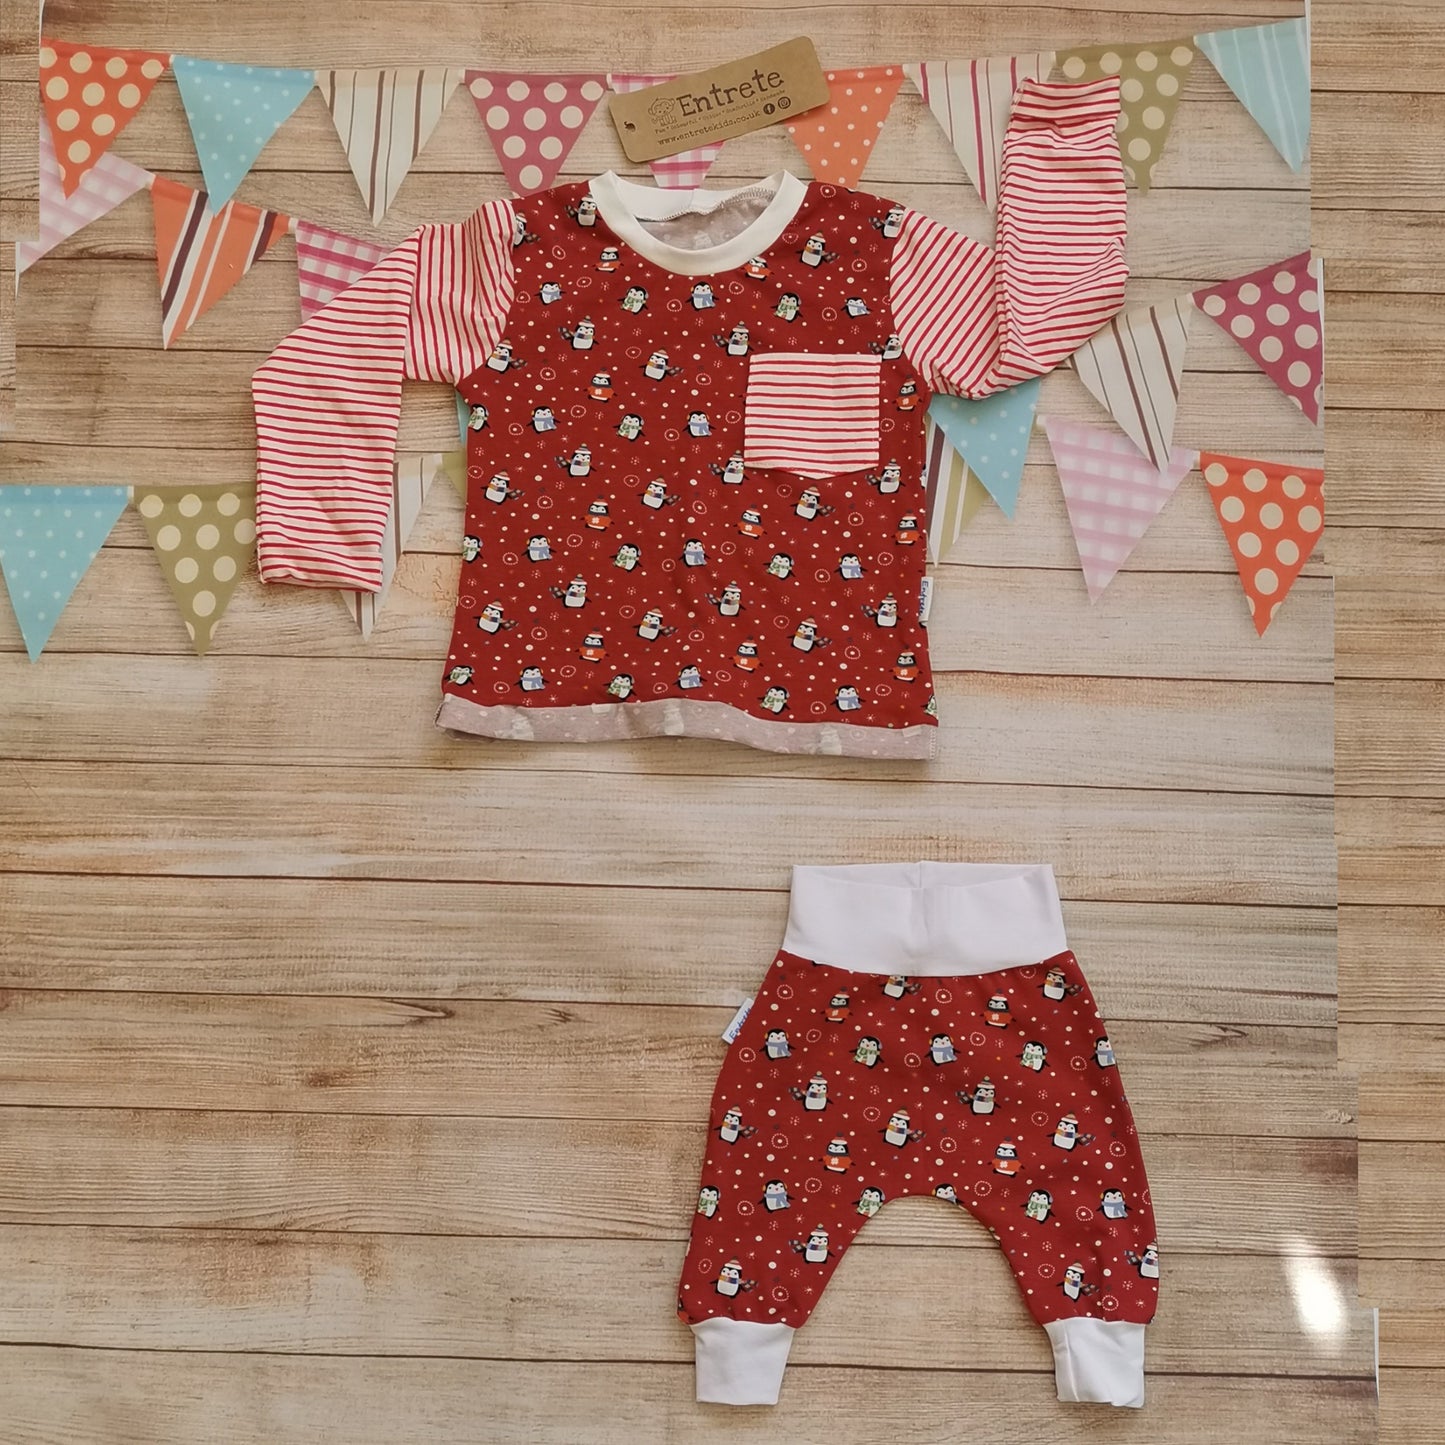 Super comfy harem pants in a fun Christmas design. Handmade using red penguins cotton jersey and white cotton jersey. Shown as a set with a matching red penguins and striped Christmas top. (sold separately)